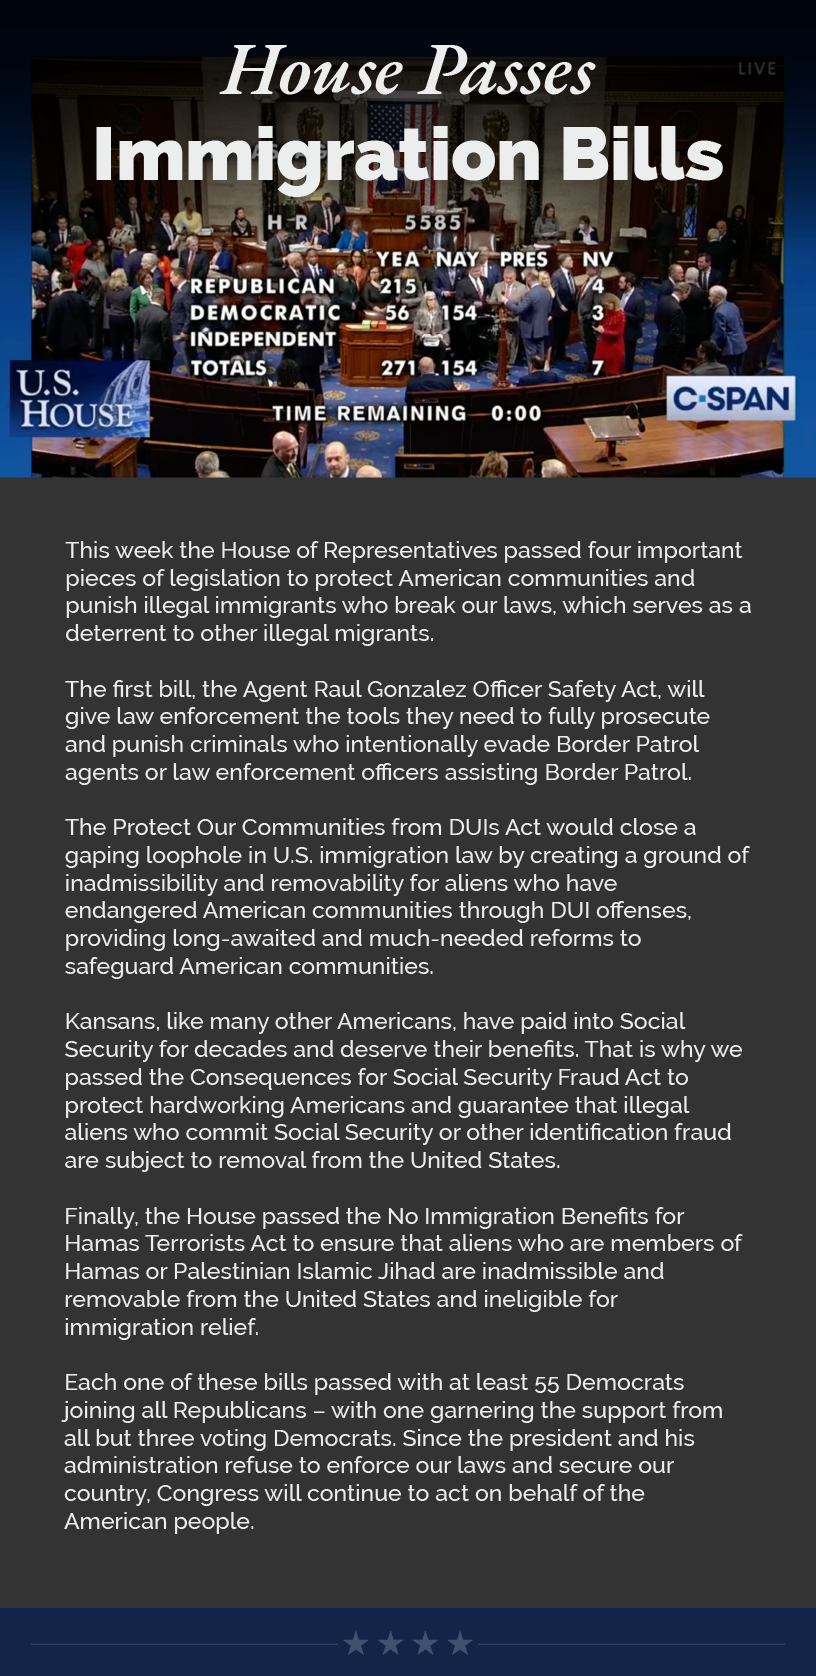 Headline: House Passes Immigration Bills. This week the House of Representatives passed four important pieces of legislation to protect American communities and punish illegal immigrants who break our laws, which serves as a deterrent to other illegal migrants.  The first bill, the Agent Raul Gonzalez Officer Safety Act, will give law enforcement the tools they need to fully prosecute and punish criminals who intentionally evade Border Patrol agents or law enforcement officers assisting Border Patrol.  The Protect Our Communities from DUIs Act would close a gaping loophole in U.S. immigration law by creating a ground of inadmissibility and removability for aliens who have endangered American communities through DUI offenses, providing long-awaited and much-needed reforms to safeguard American communities.  Kansans, like many other Americans, have paid into Social Security for decades and deserve their benefits. That is why we passed the Consequences for Social Security Fraud Act to protect hardworking Americans and guarantee that illegal aliens who commit Social Security or other identification fraud are subject to removal from the United States.  Finally, the House passed the No Immigration Benefits for Hamas Terrorists Act to ensure that aliens who are members of Hamas or Palestinian Islamic Jihad are inadmissible and removable from the United States and ineligible for immigration relief.  Each one of these bills passed with at least 55 Democrats joining all Republicans – with one garnering the support from all but three voting Democrats. Since the president and his administration refuse to enforce our laws and secure our country, Congress will continue to act on behalf of the American people.